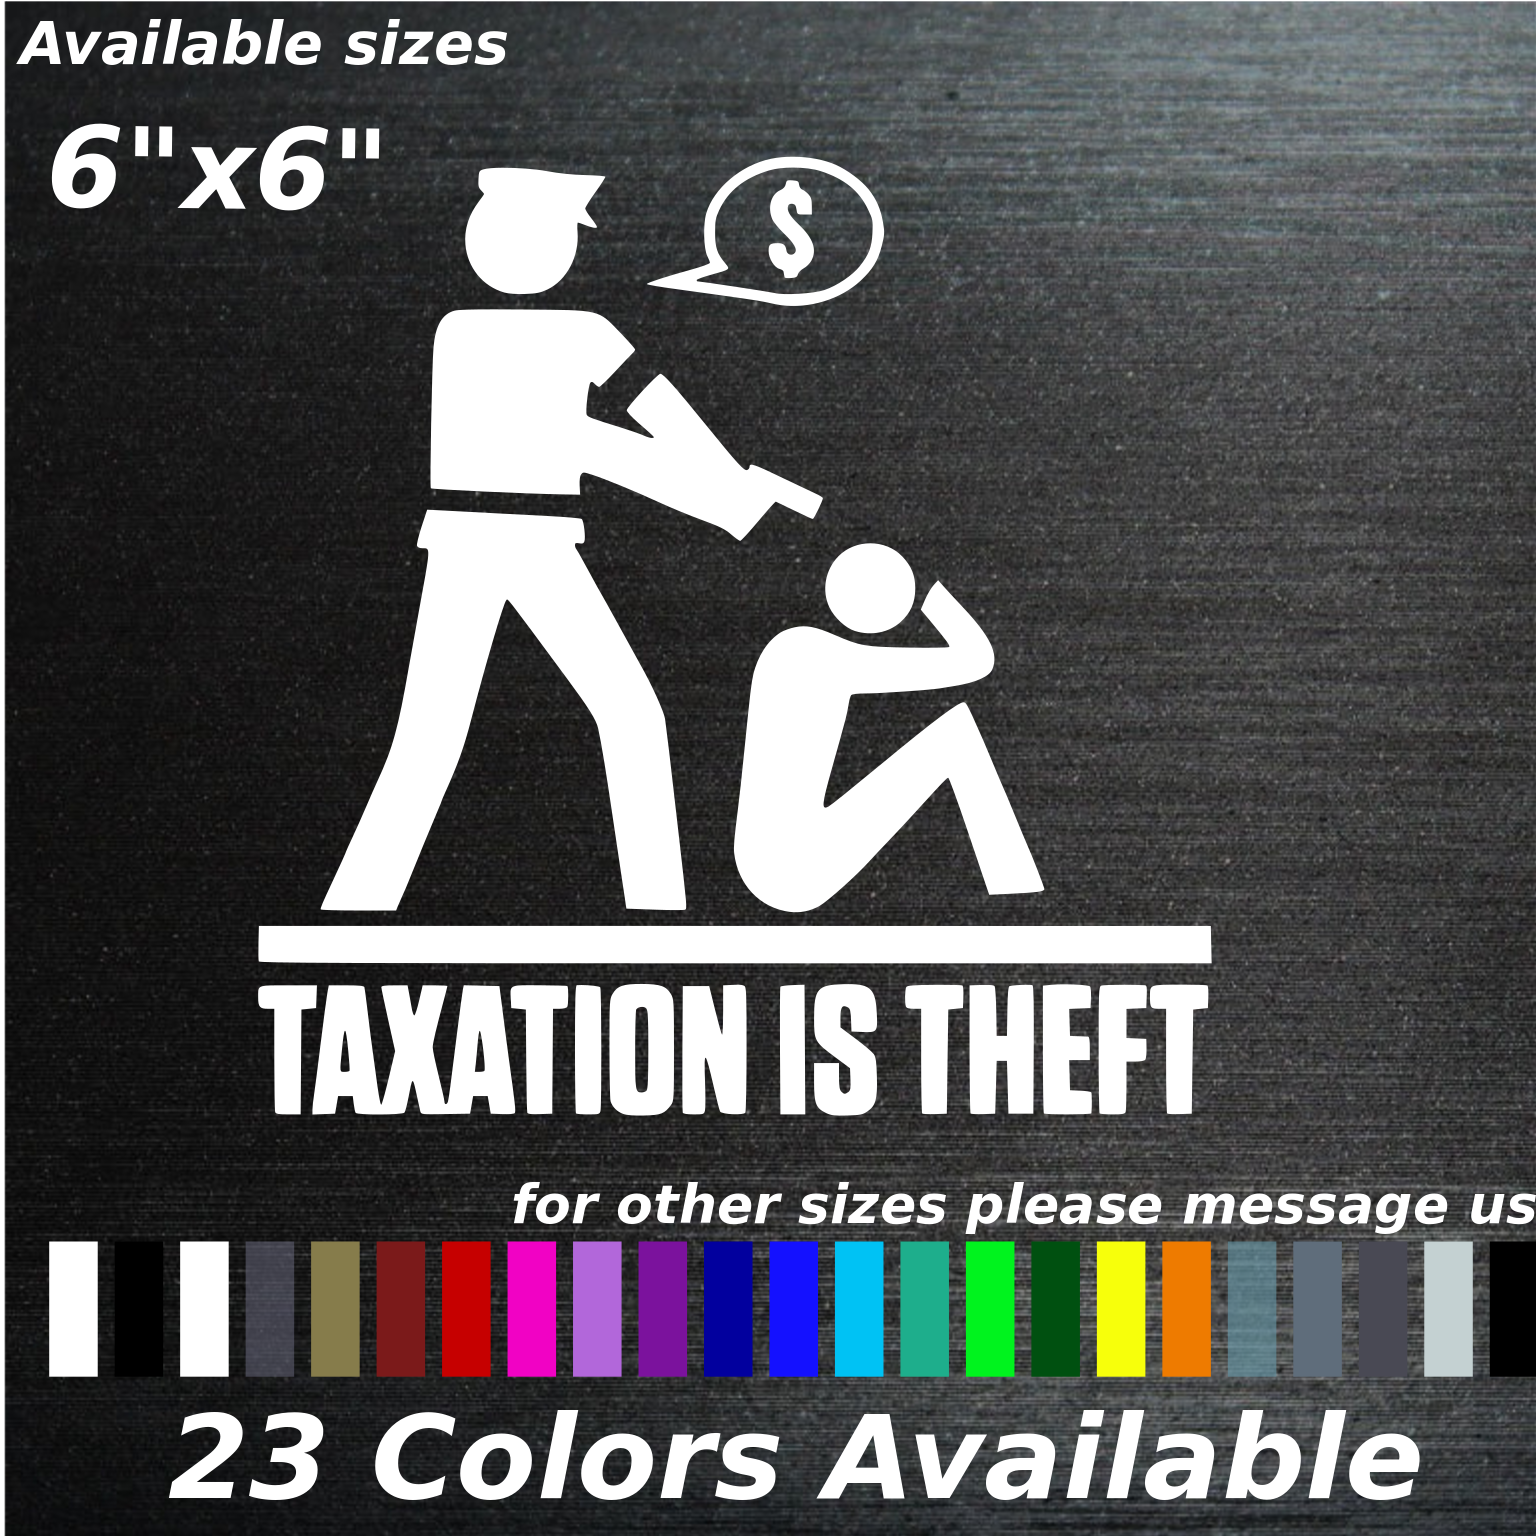 Taxation is theft decal sticker anti government freedom america